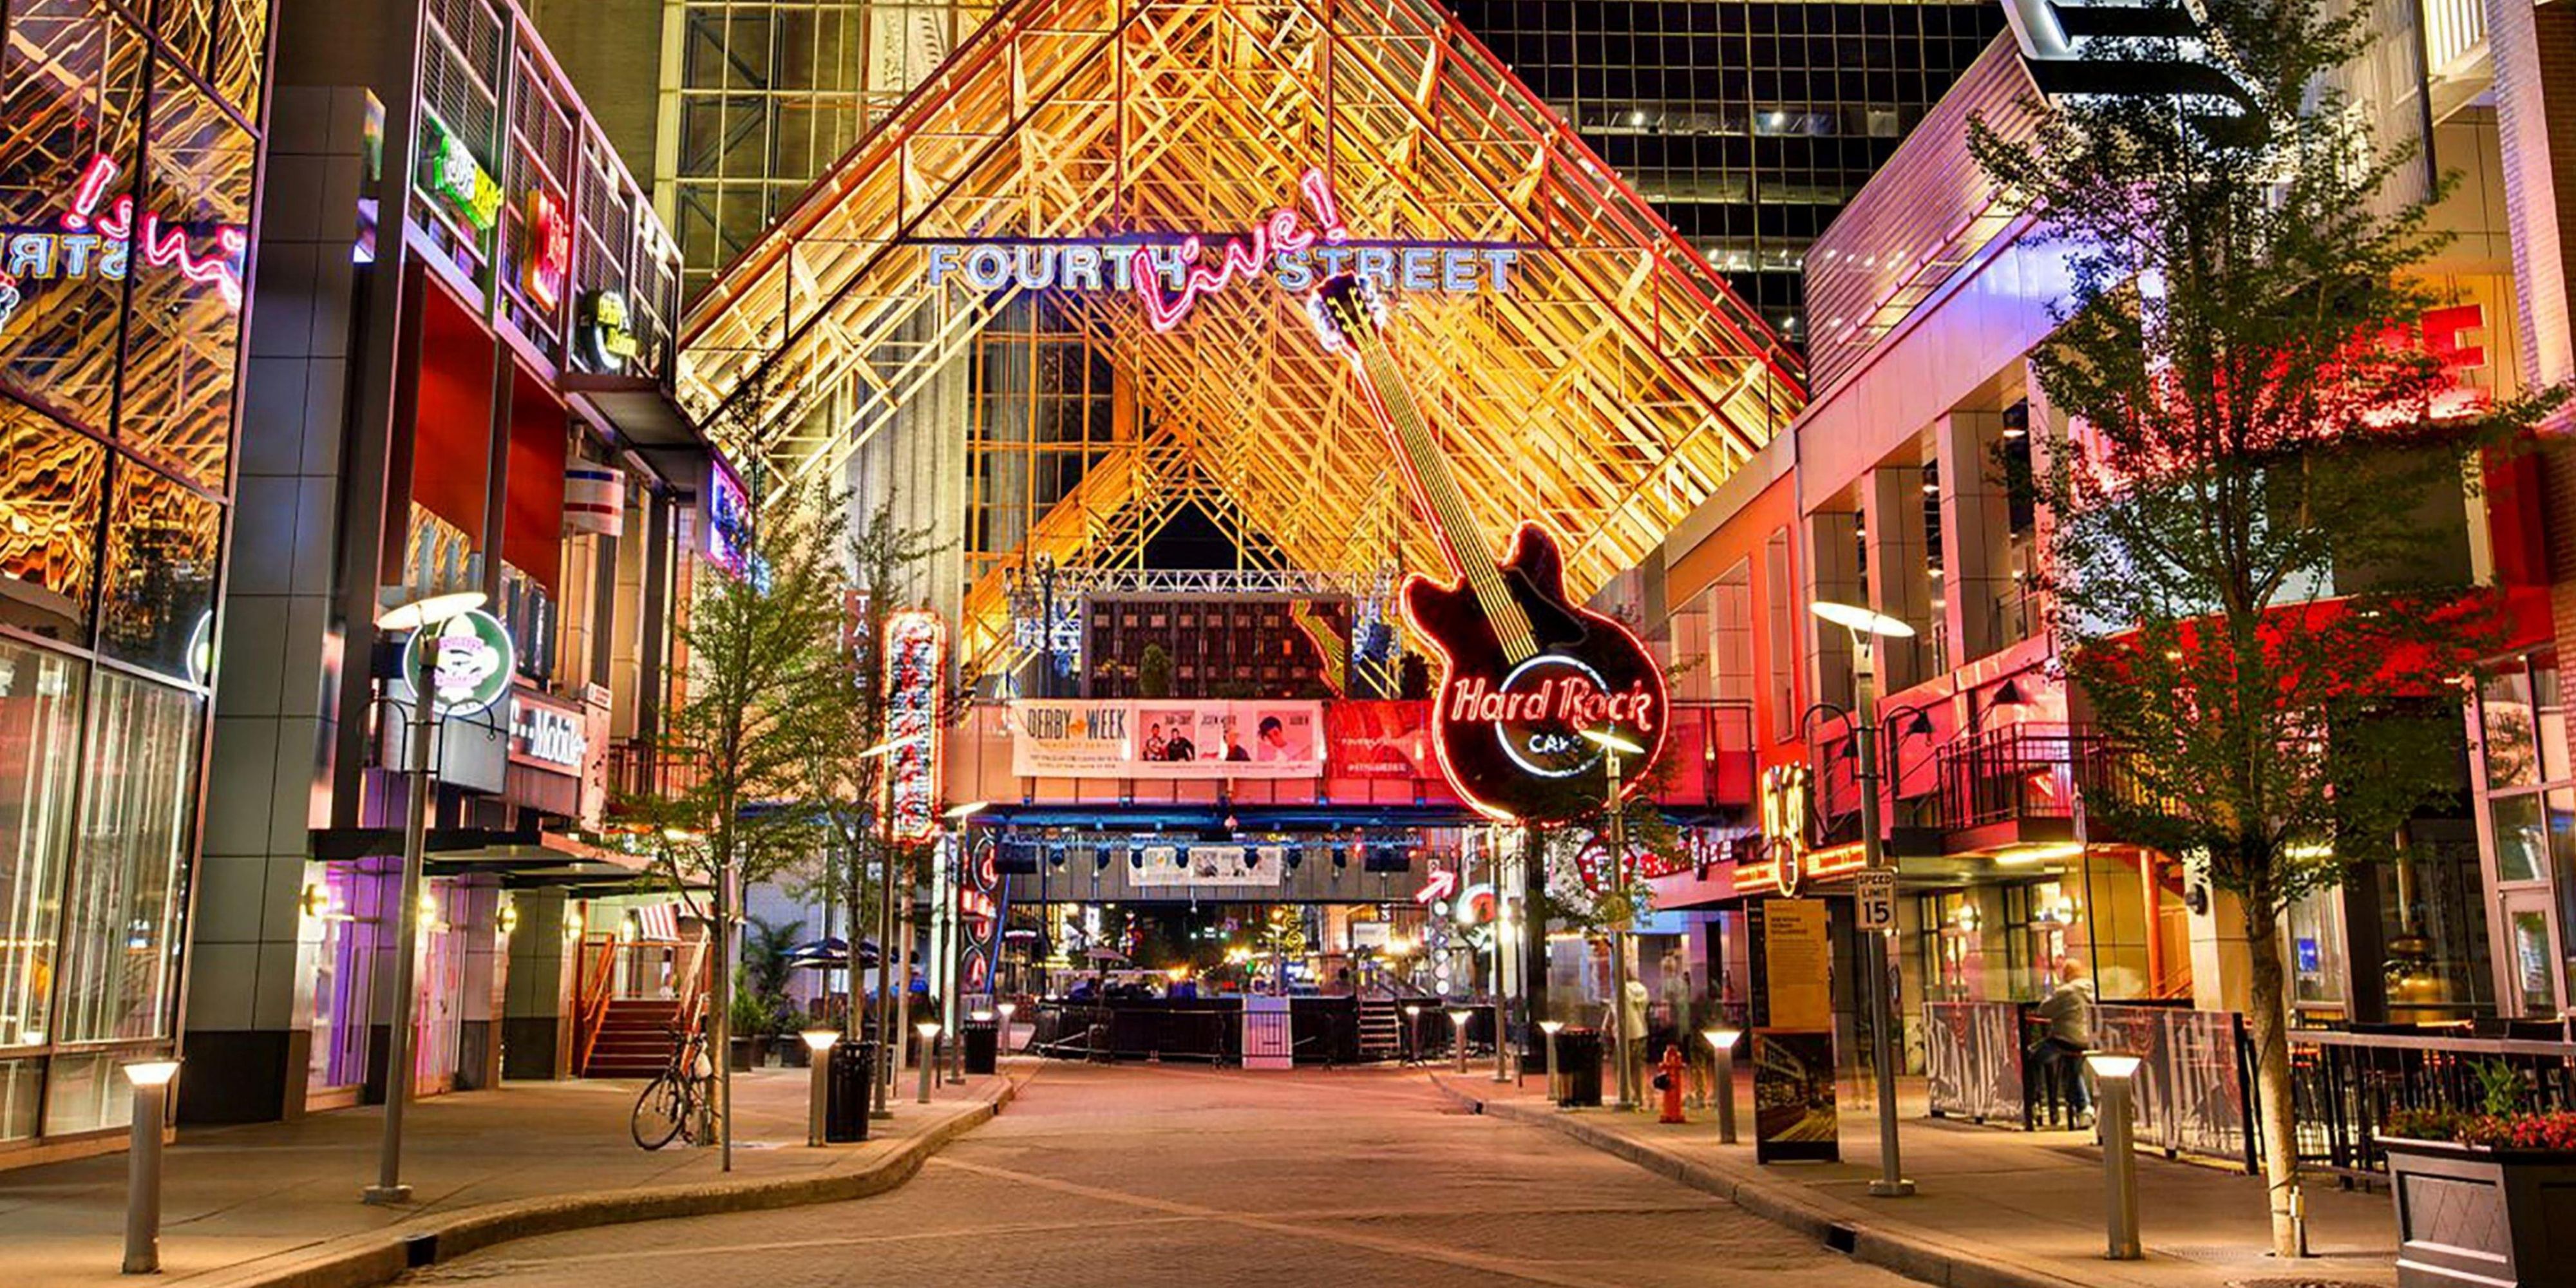 Stay with us and be within blocks of walking to the famous 4th Street Live with plenty of music, food, drinks, and shopping. 